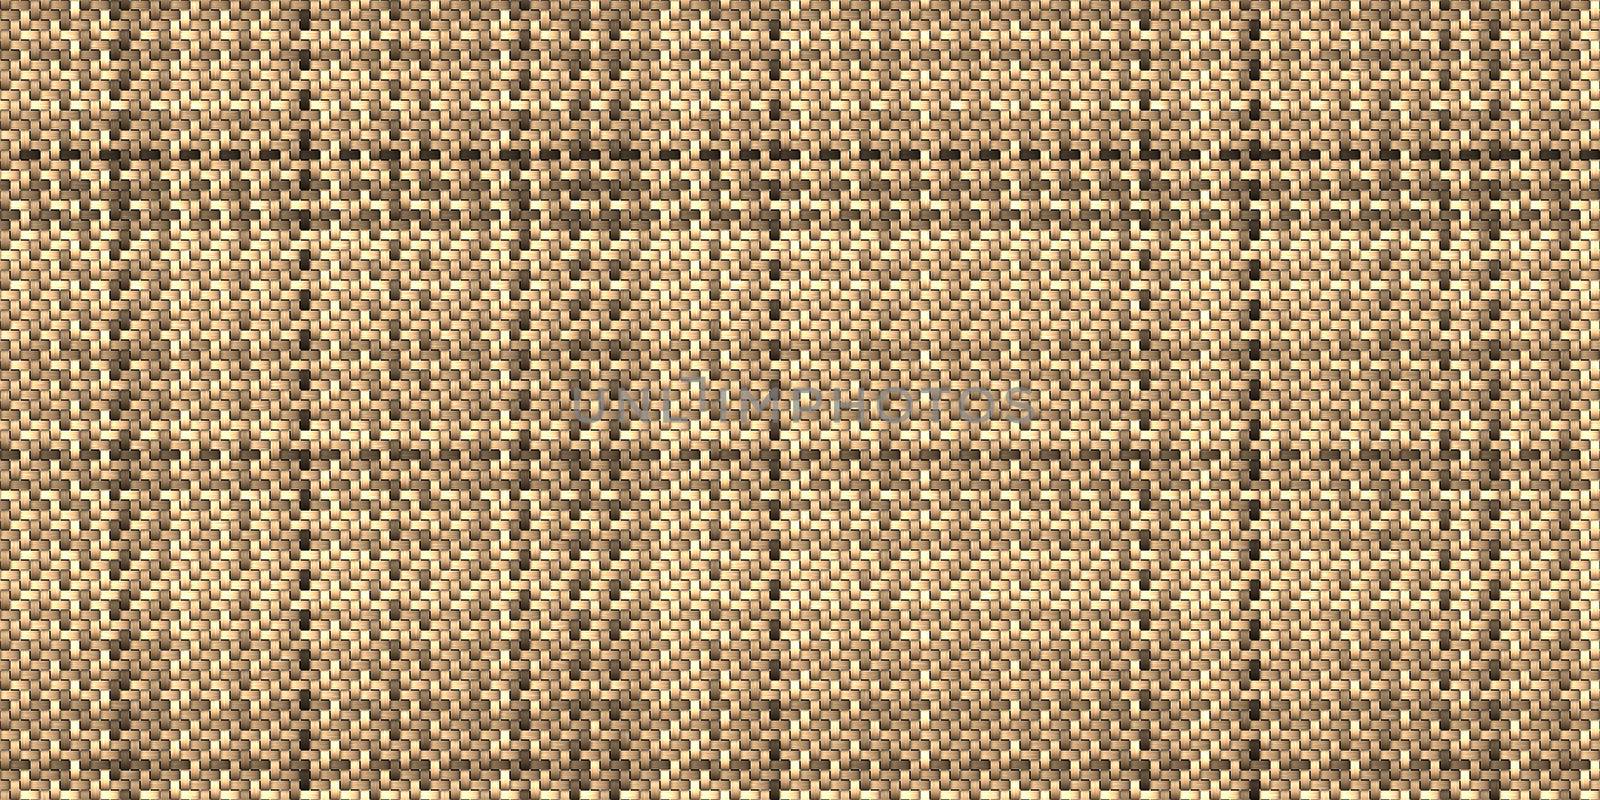 Seamless Basket Weaving Background. Woven Wicker Straw Texture. by sanches812